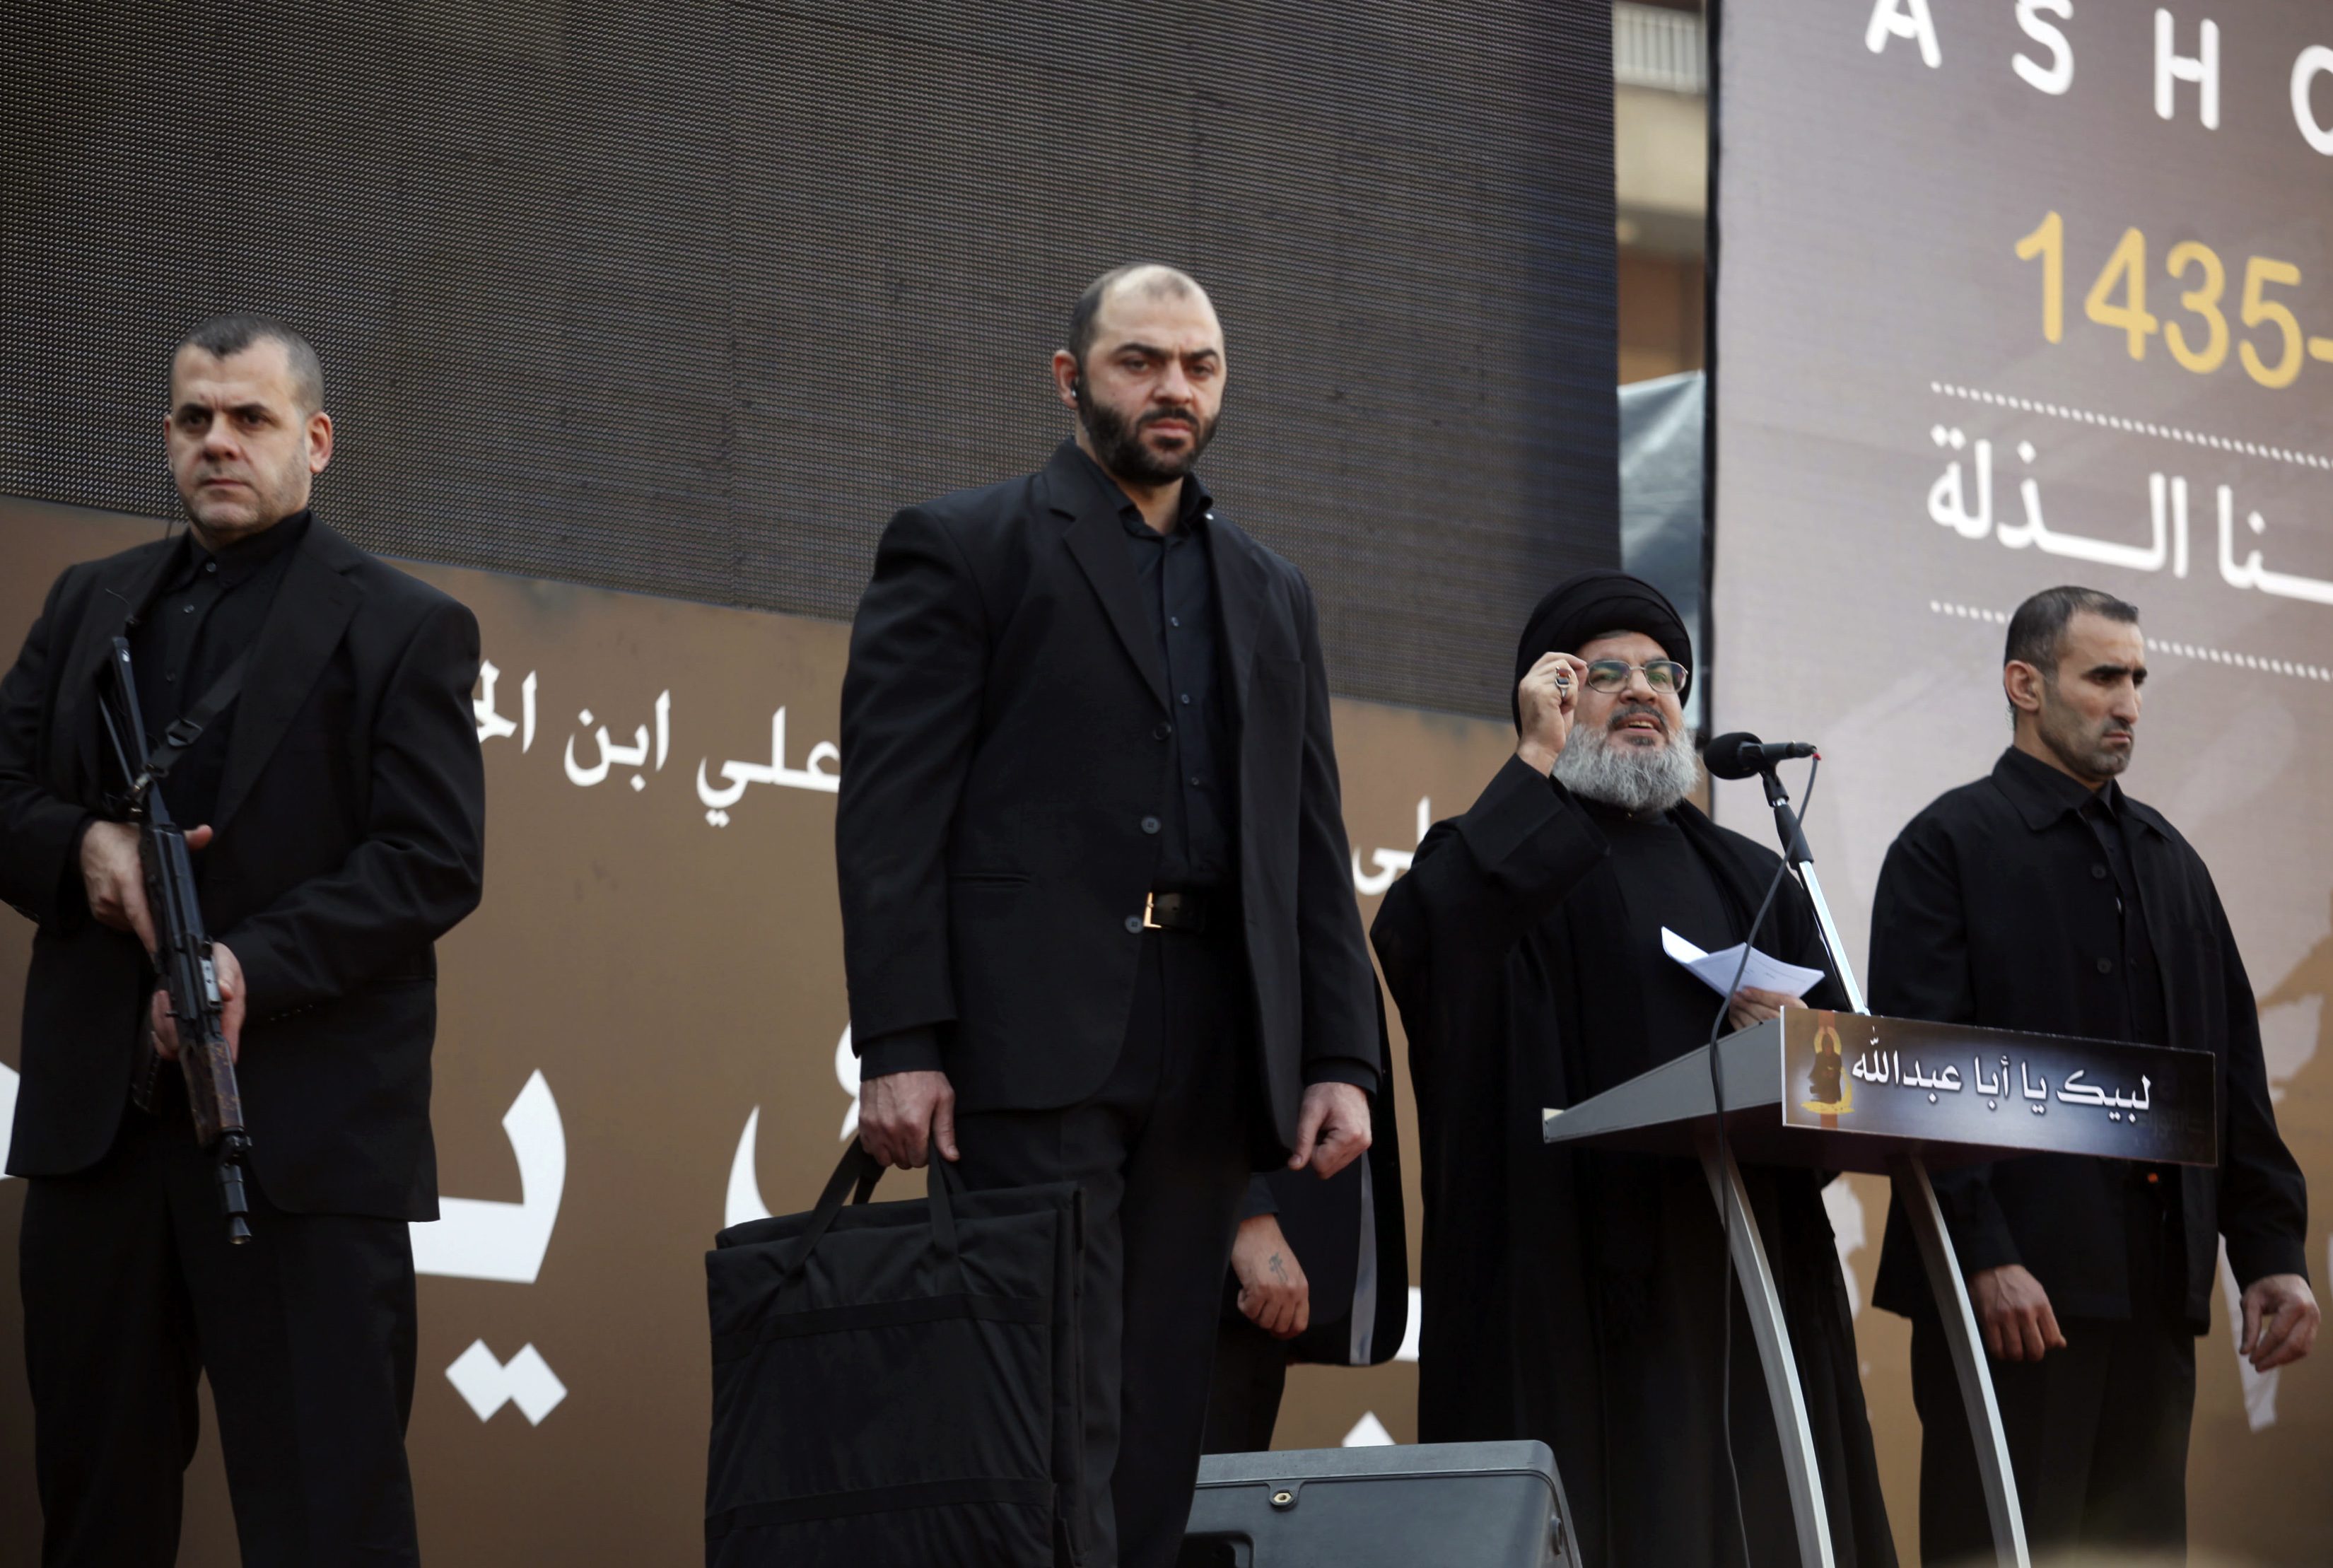 Lebanon's Hezbollah leader Hassan Nasrallah, surrounded by bodyguards, addresses supporters in Beirut on Thursday. Photo: Reuters